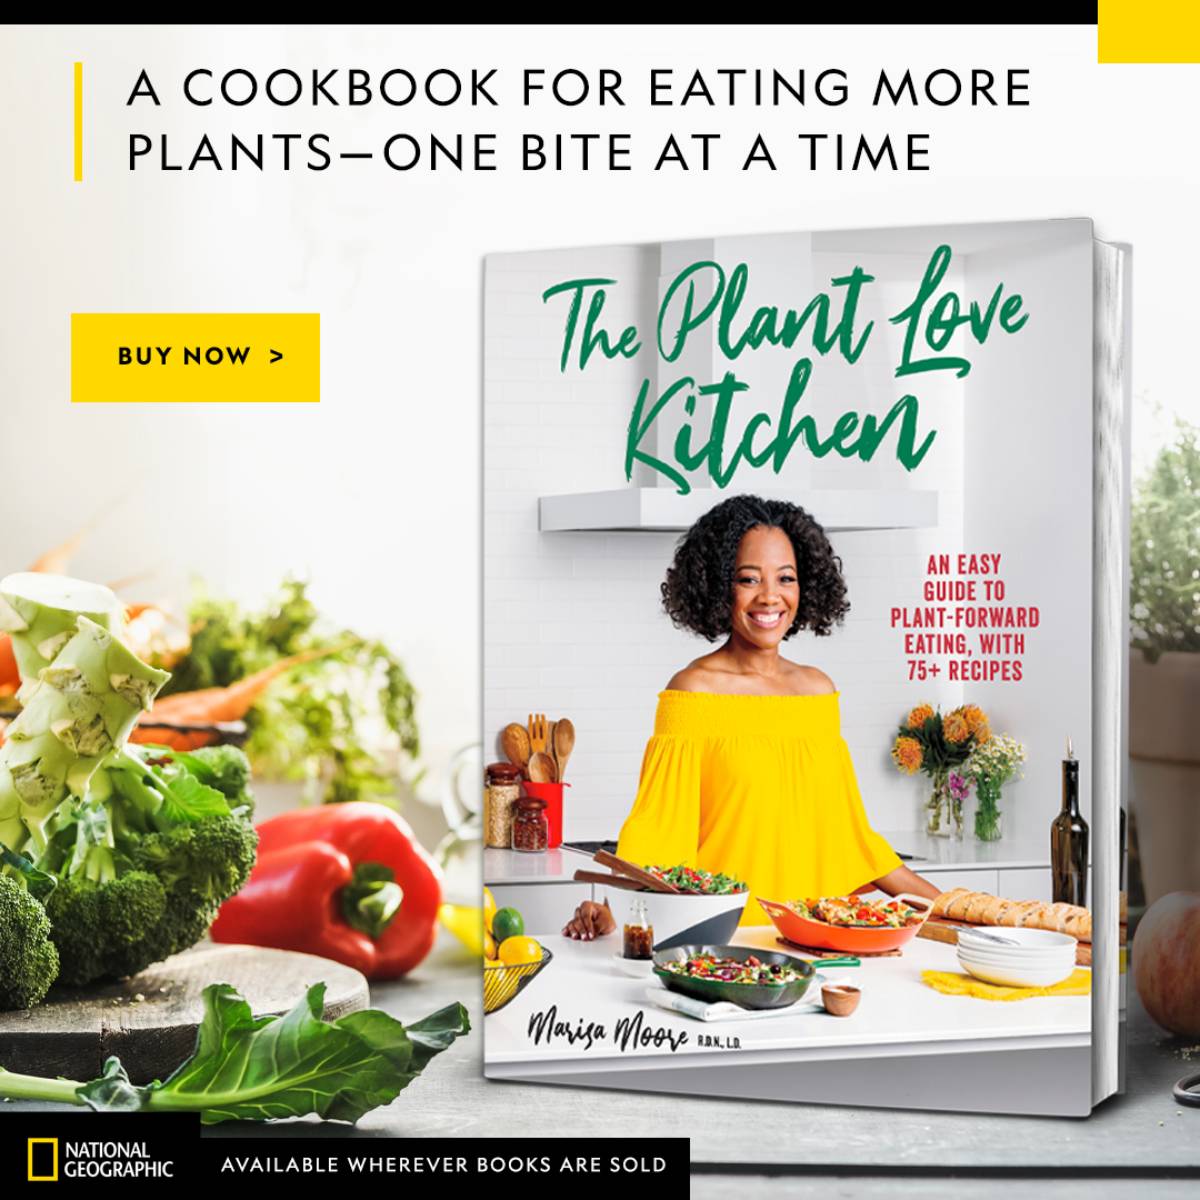 Picture of The Plant Love Kitchen book with vegetables and text reading "A Cookbook for Eating More Plants - One Bite at a Time."